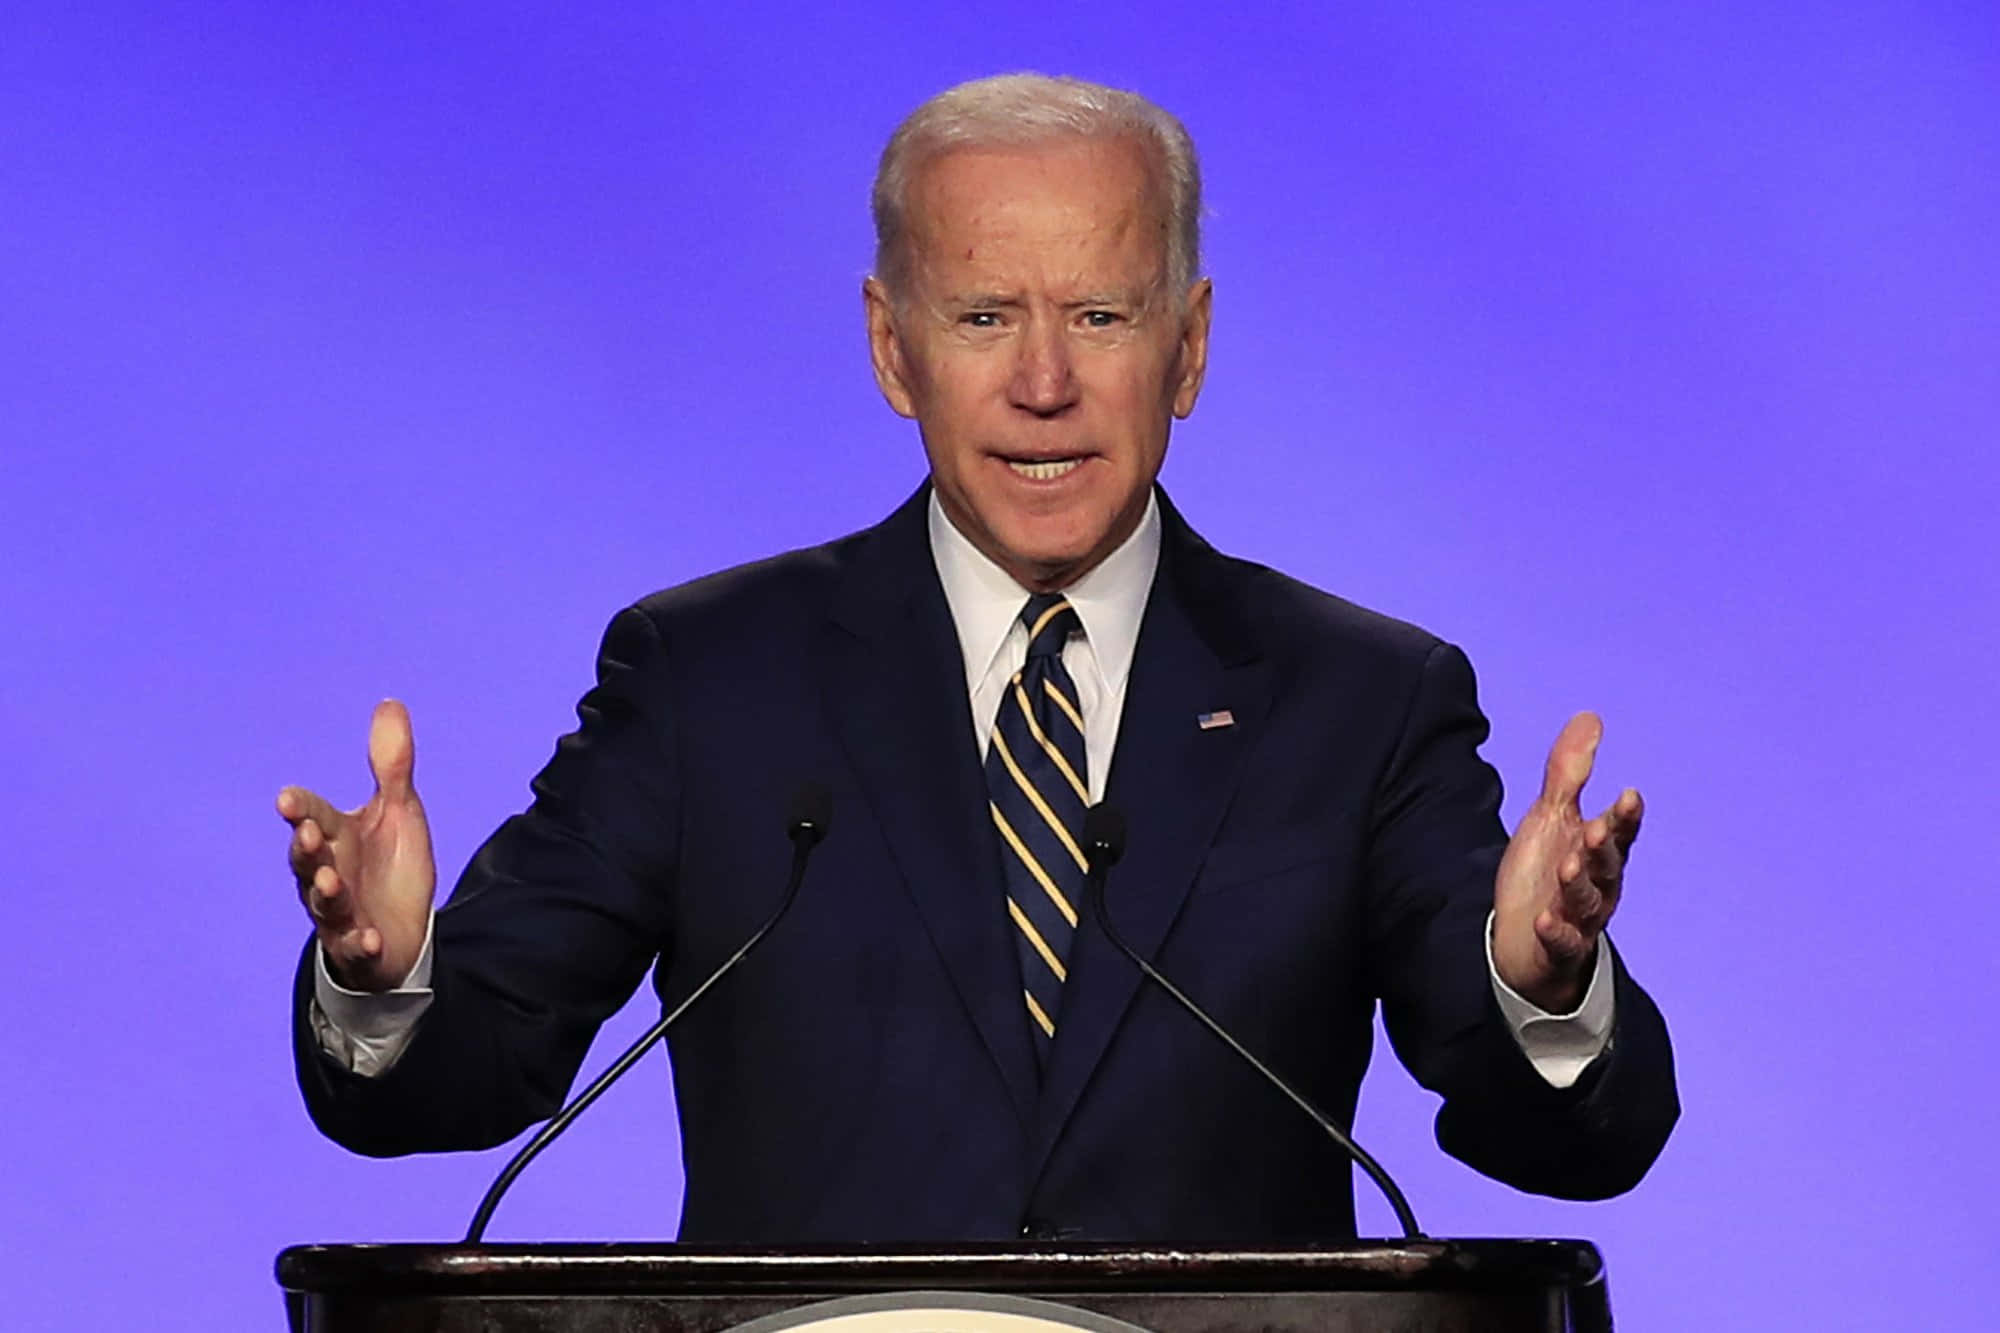 Biden Speaks At A Podium With His Hands Out